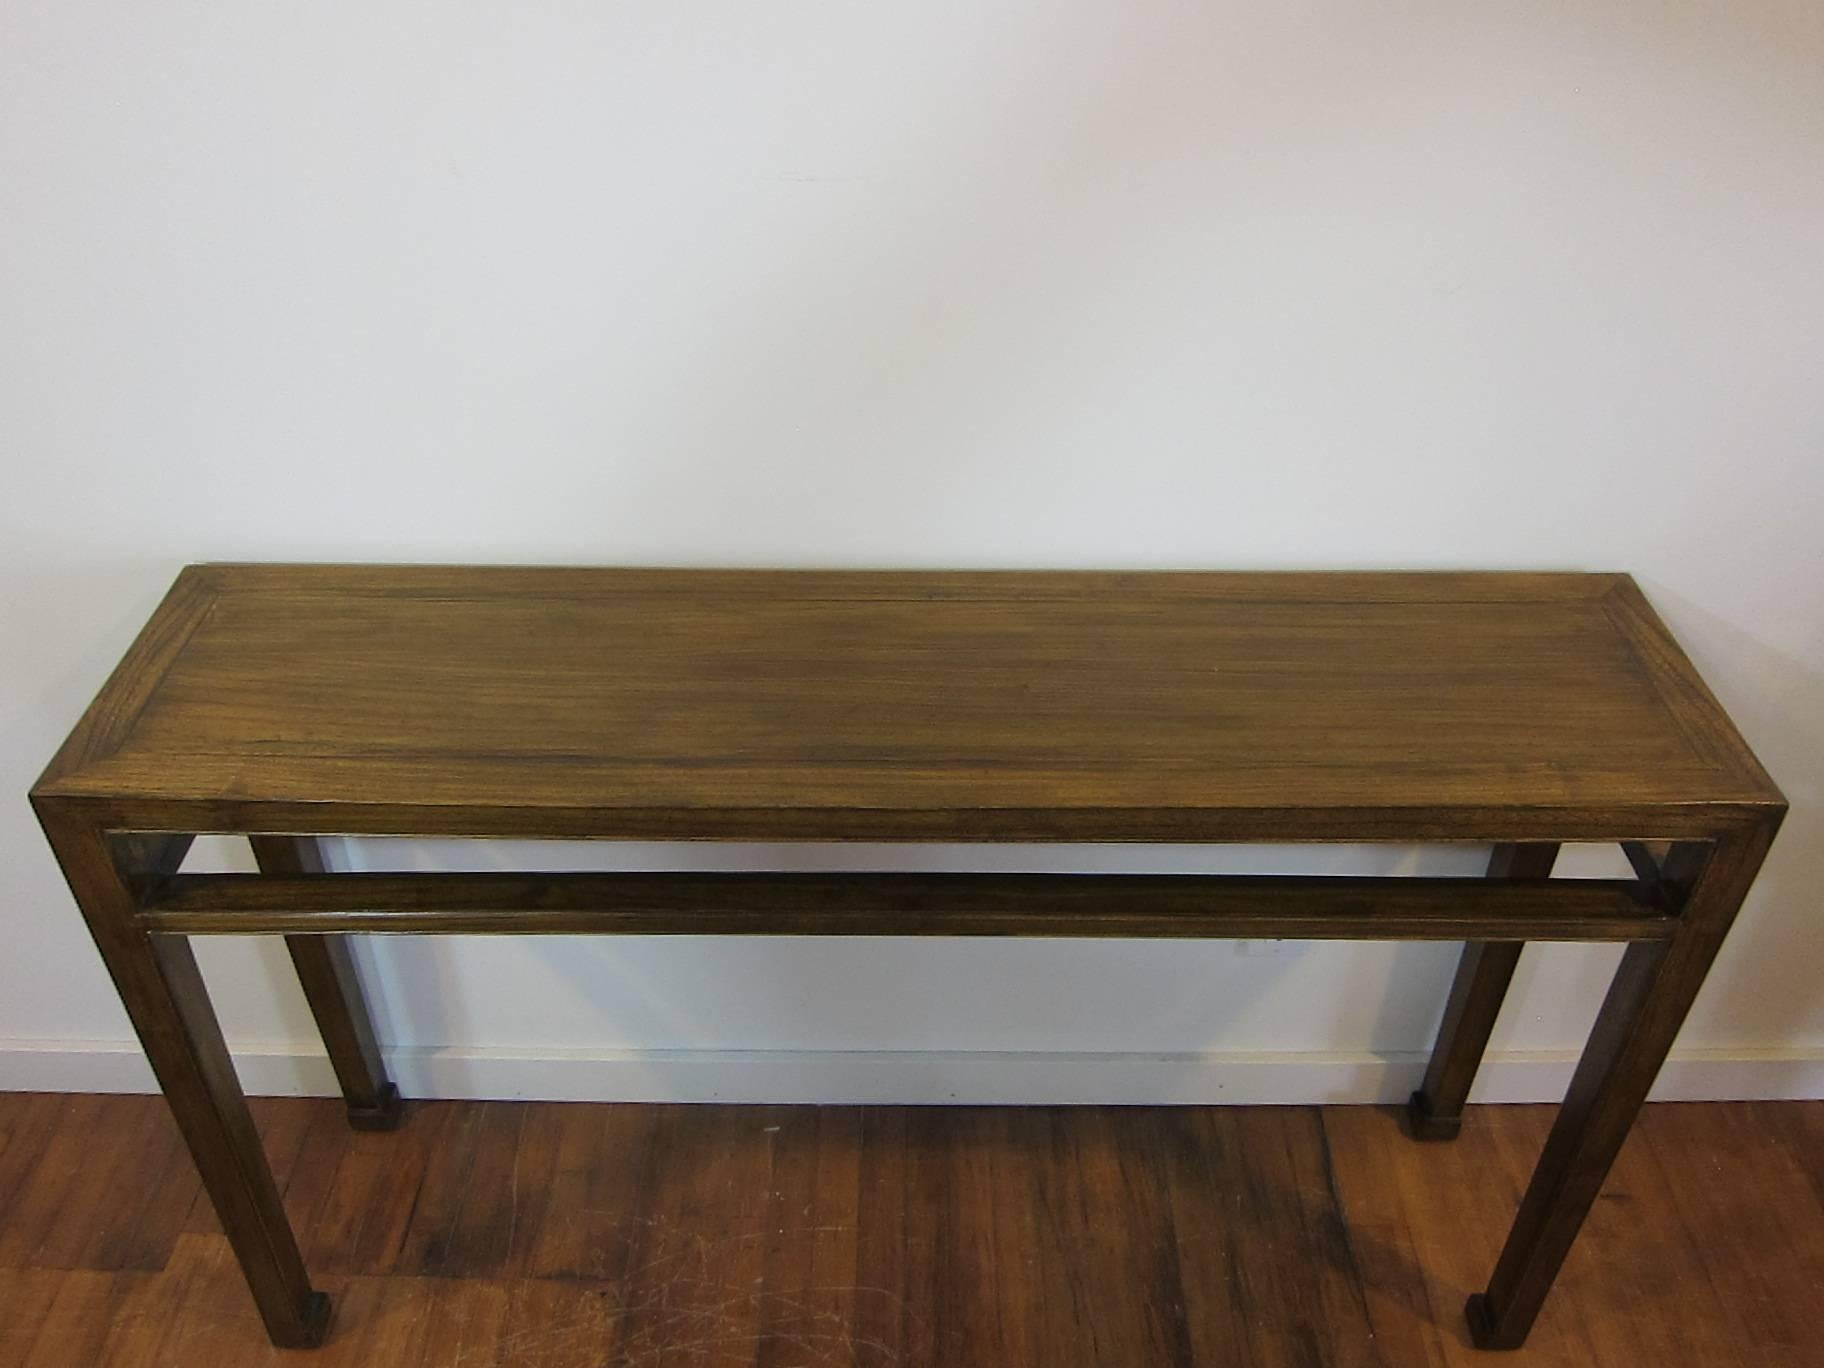 Window pane strutted elm wood console table. Solid Elm wood with legs terminating to block feet. The struts are used to create a window pane effect around the table.   A gorgeous table,  fantastic value and price.  This table has refinement and